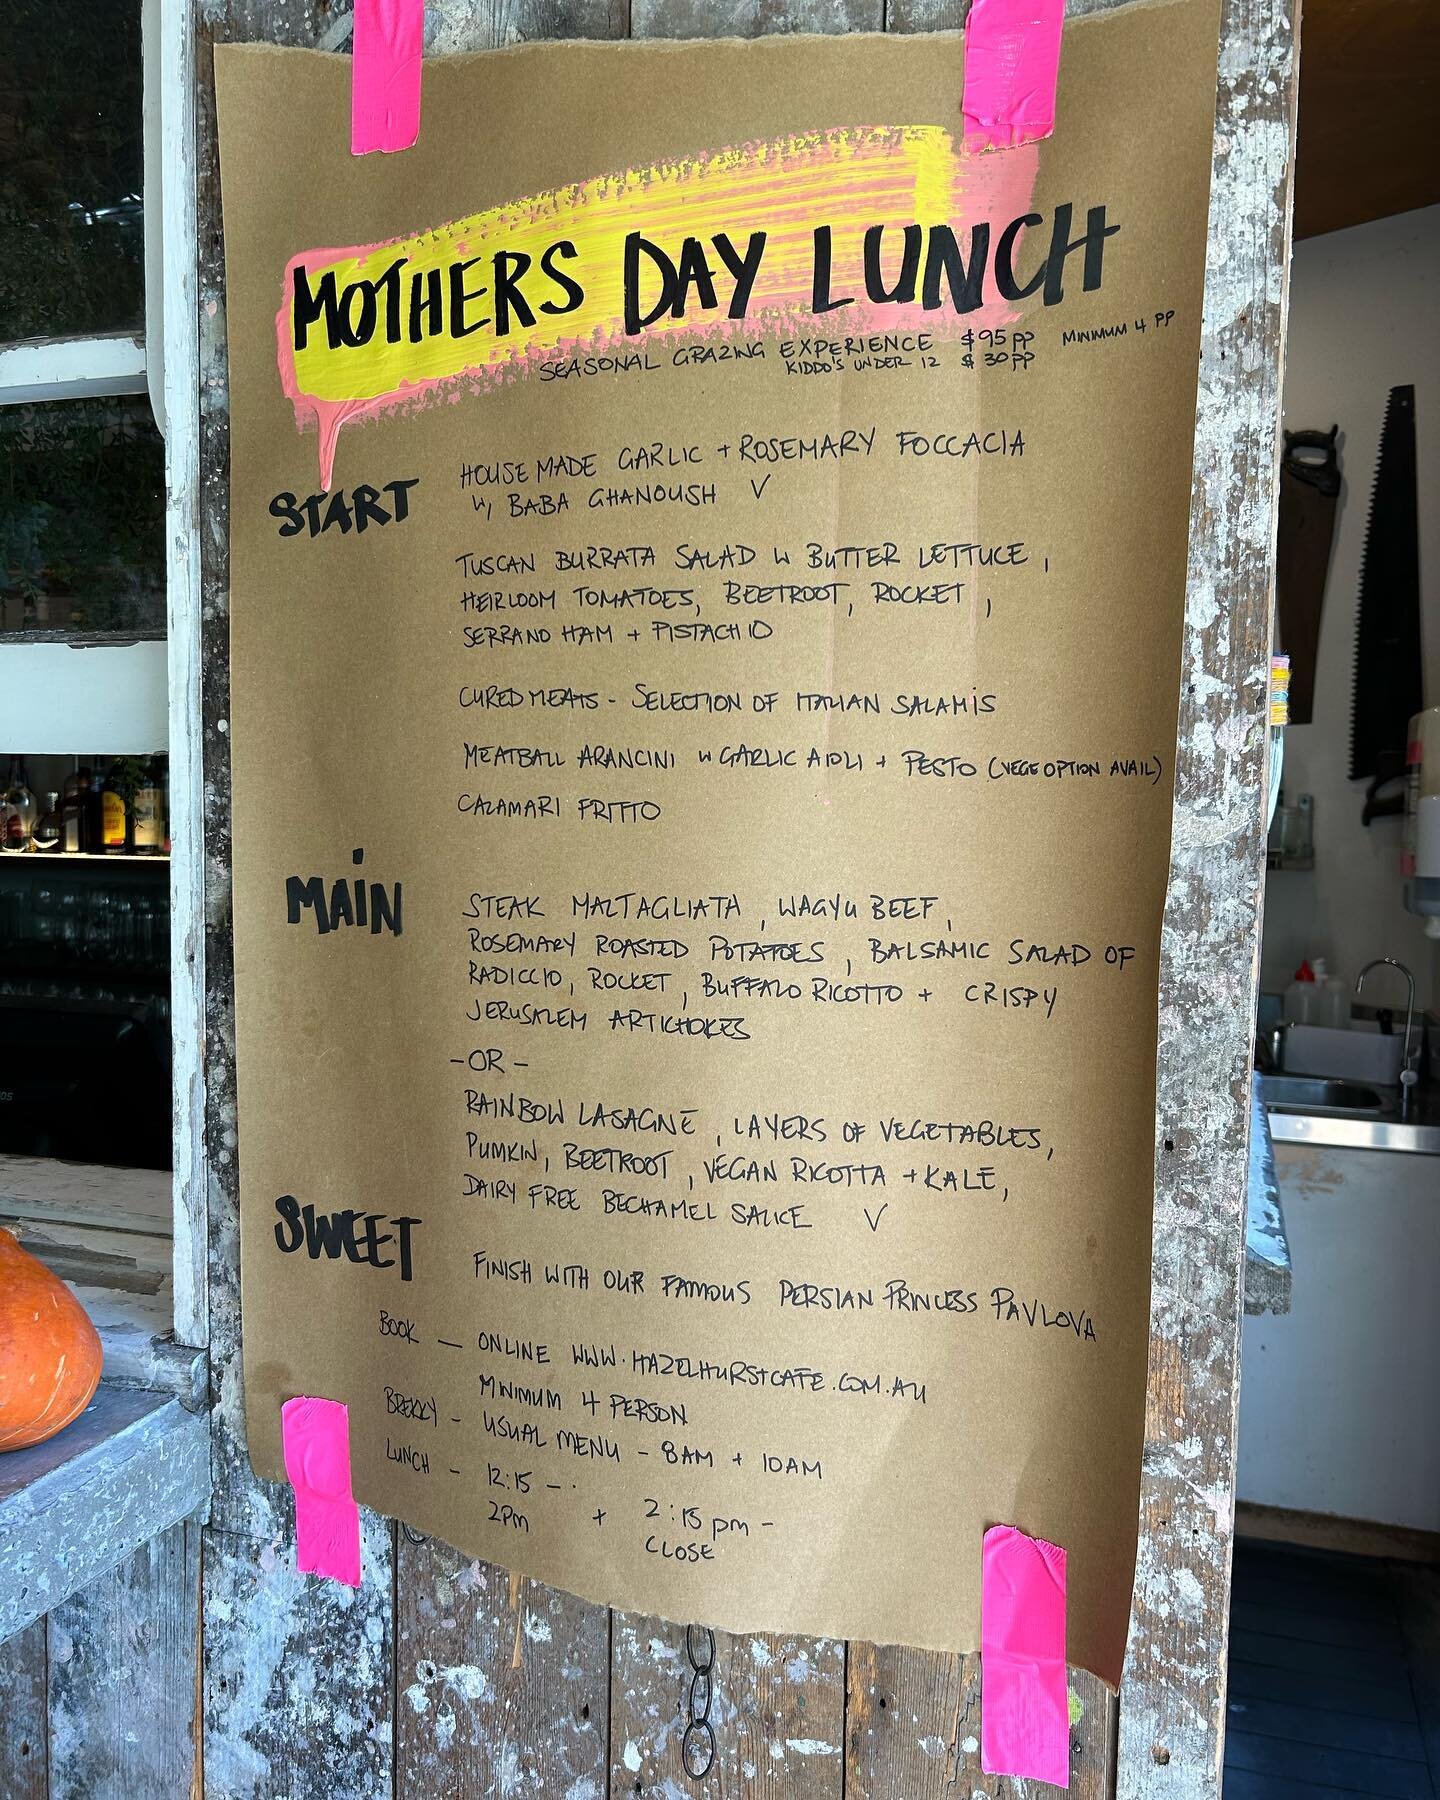 Easy to book Mothers Day lunch now. Time to get organised. Head to the link in our bio and book a table. Enjoy a delicious Italian Feast together. $95pp min 4 guests #hazelhurstcafe #mothersday